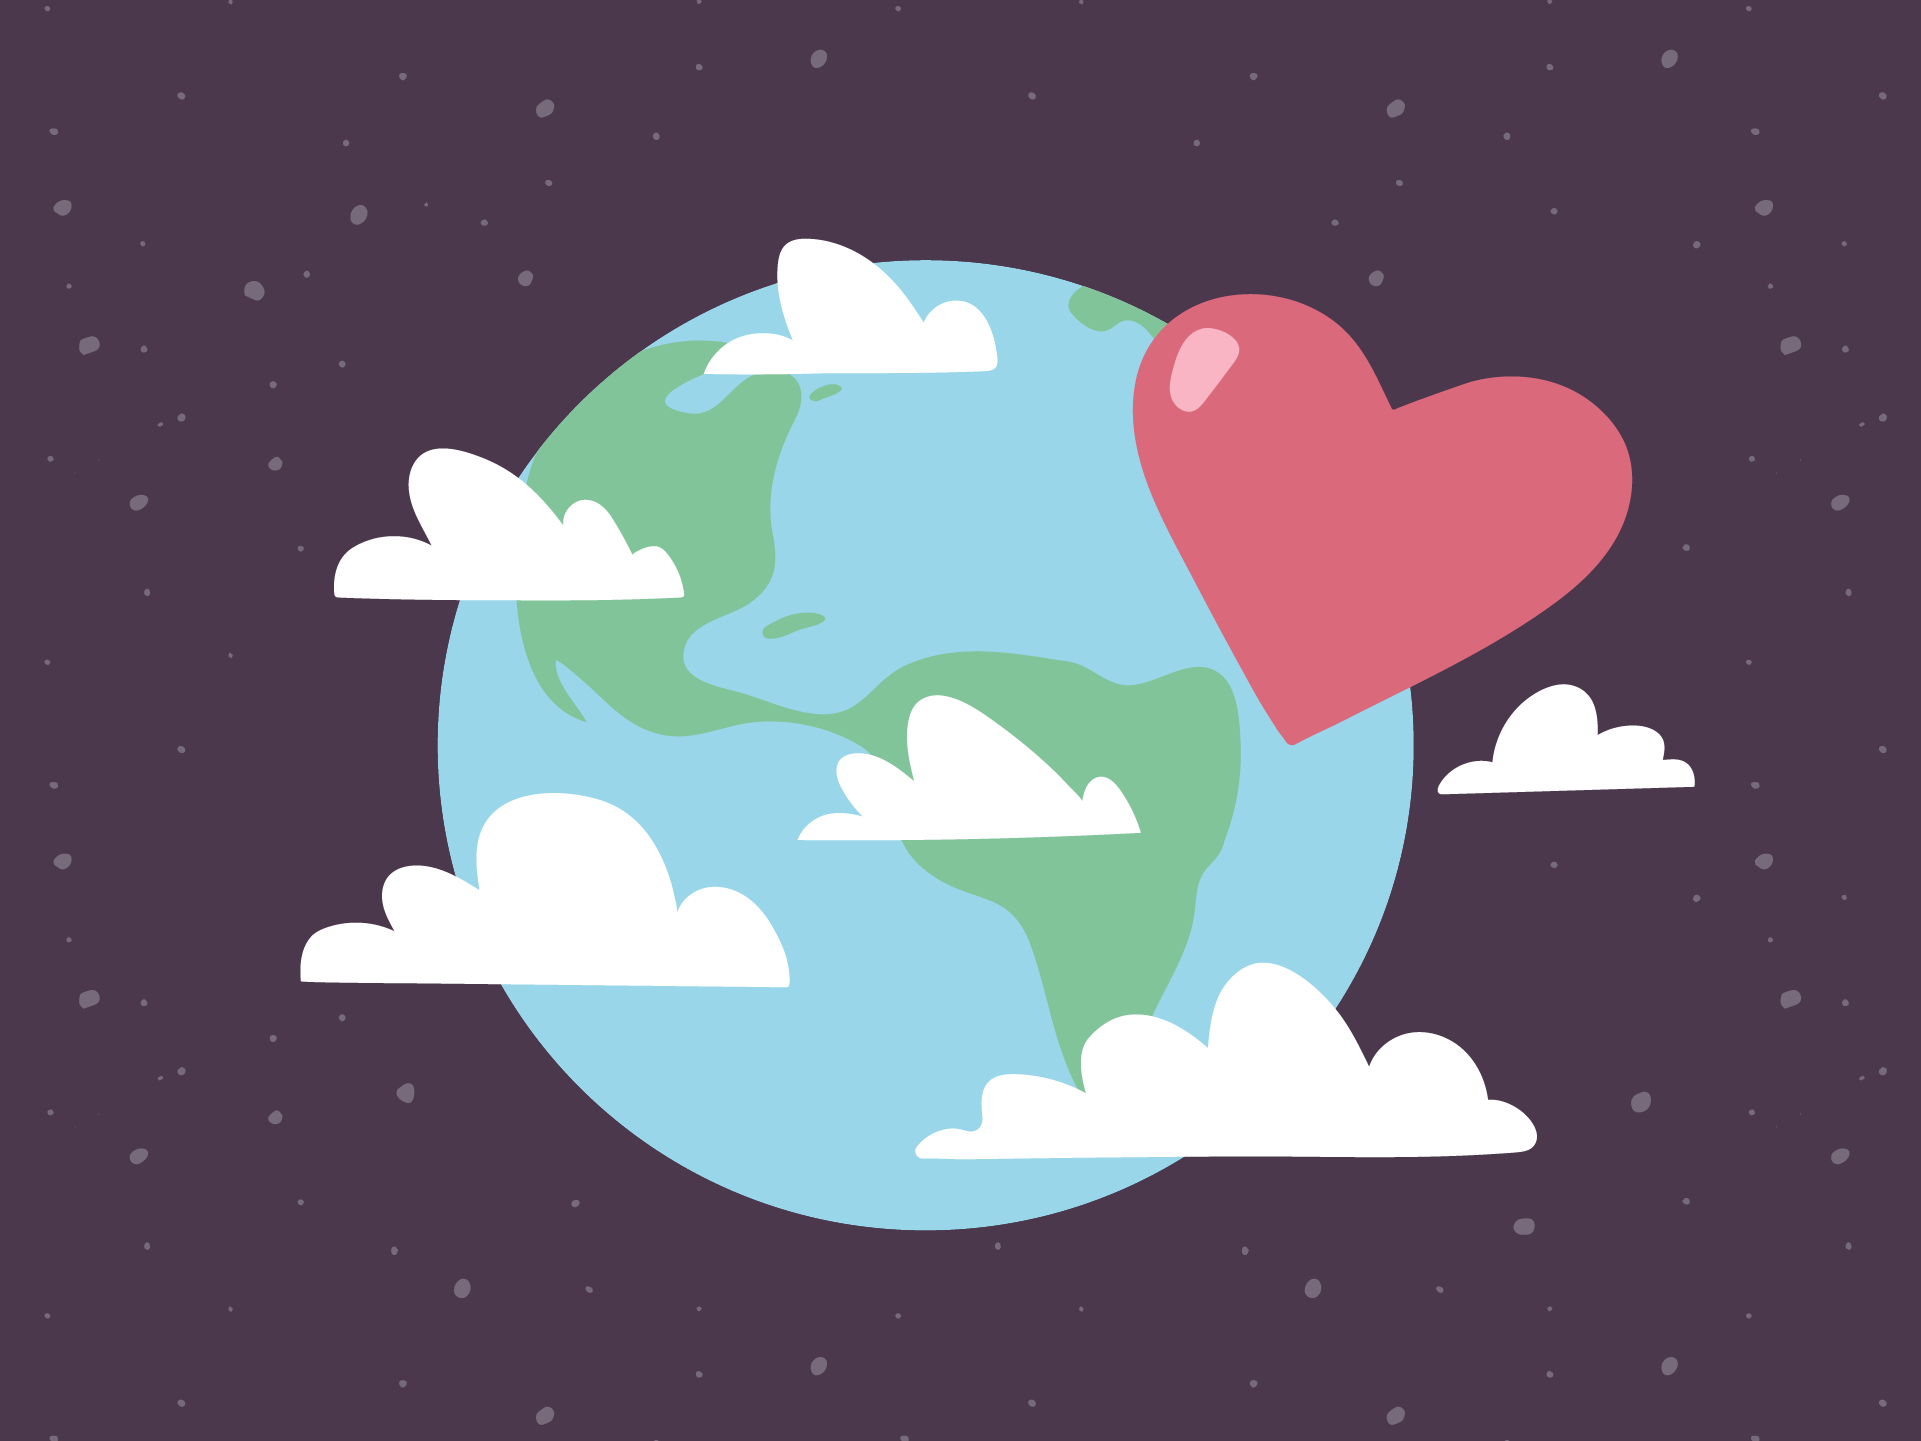 Illustration of the Earth in space with a heart